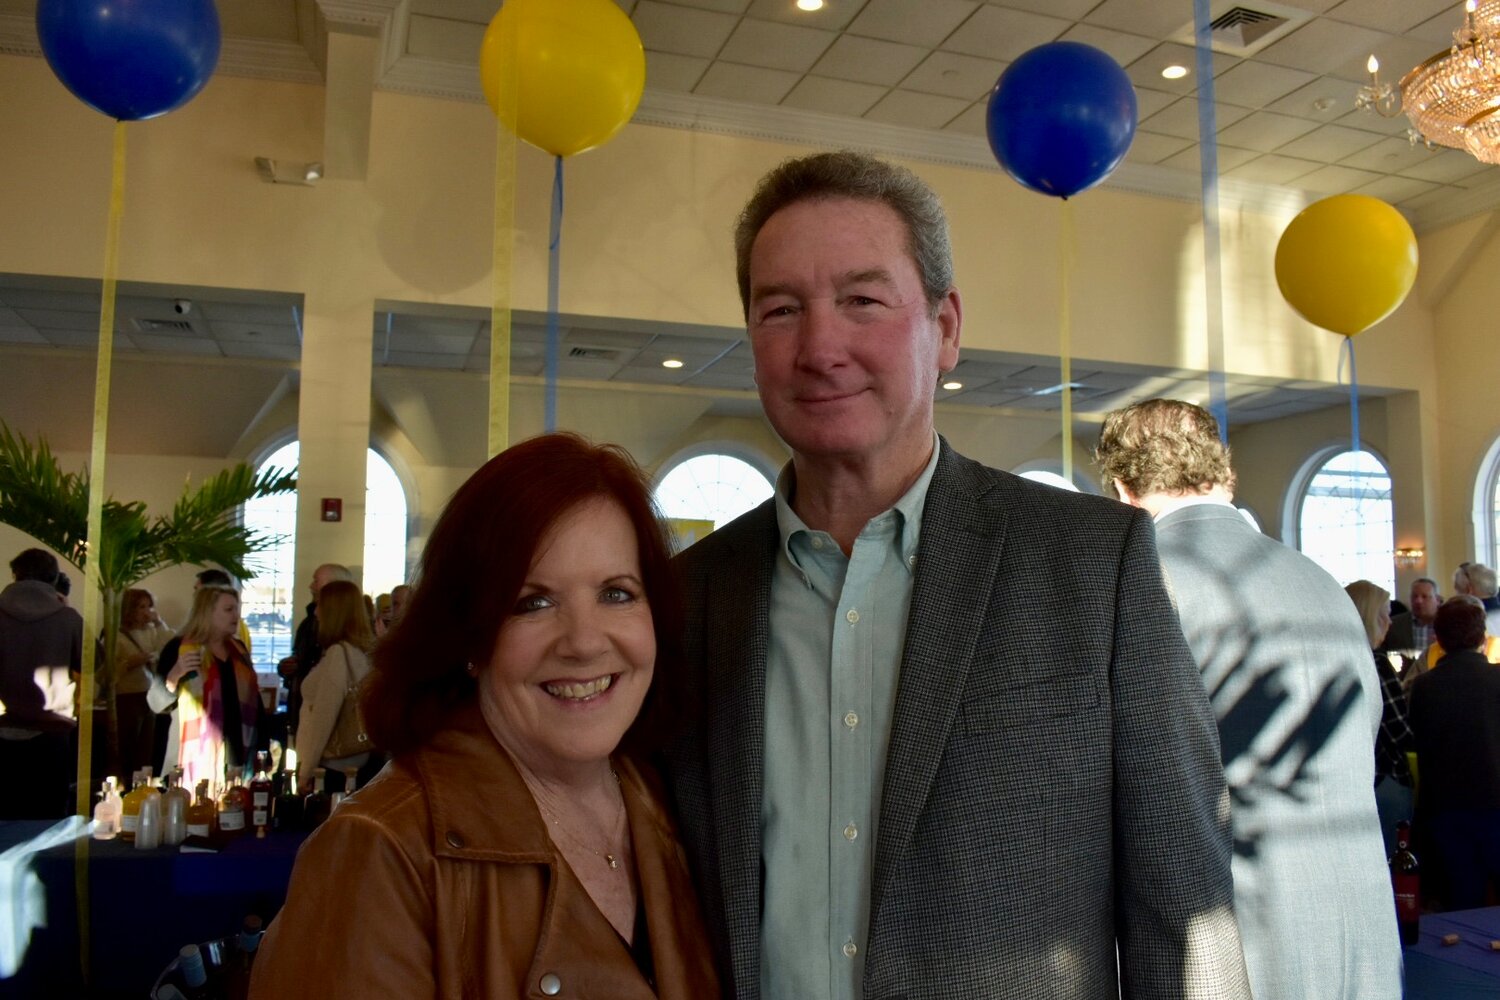 Colleen and John Valdini, the mayor of Brightwaters, were among the many smiling faces at the event.